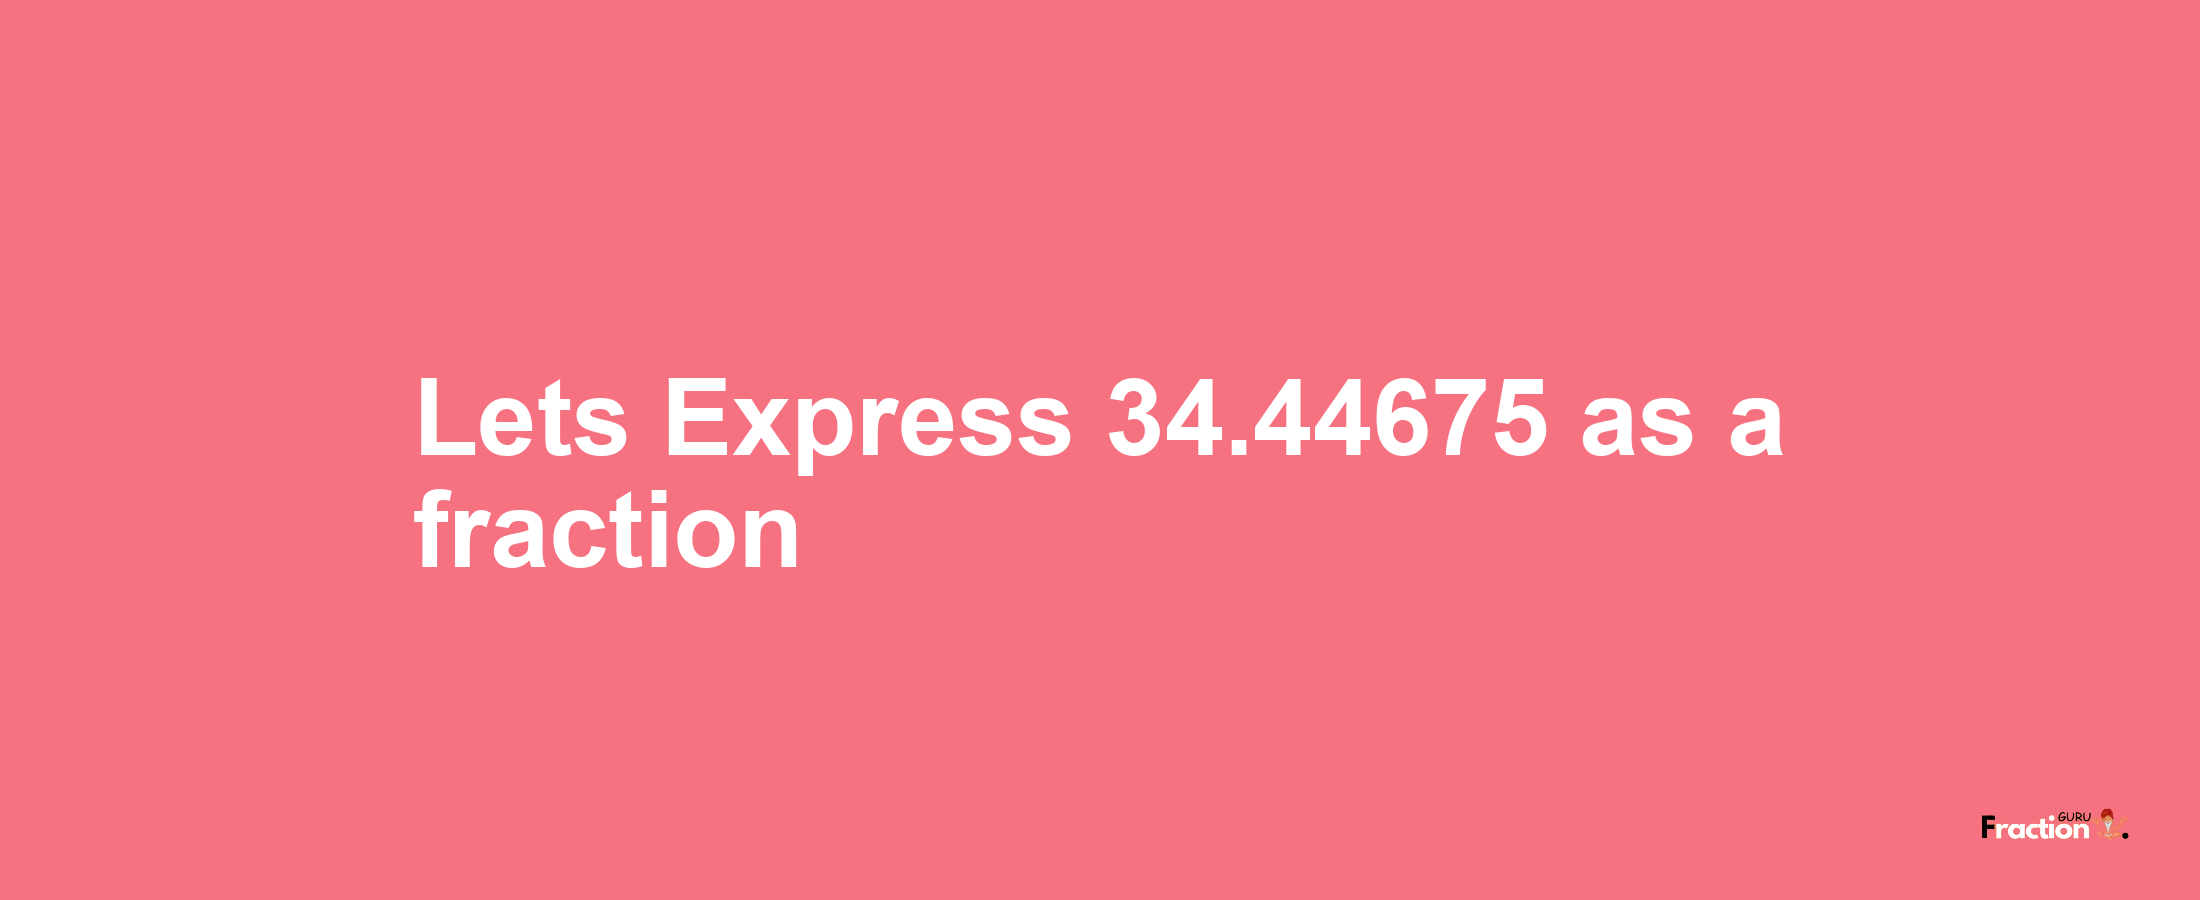 Lets Express 34.44675 as afraction